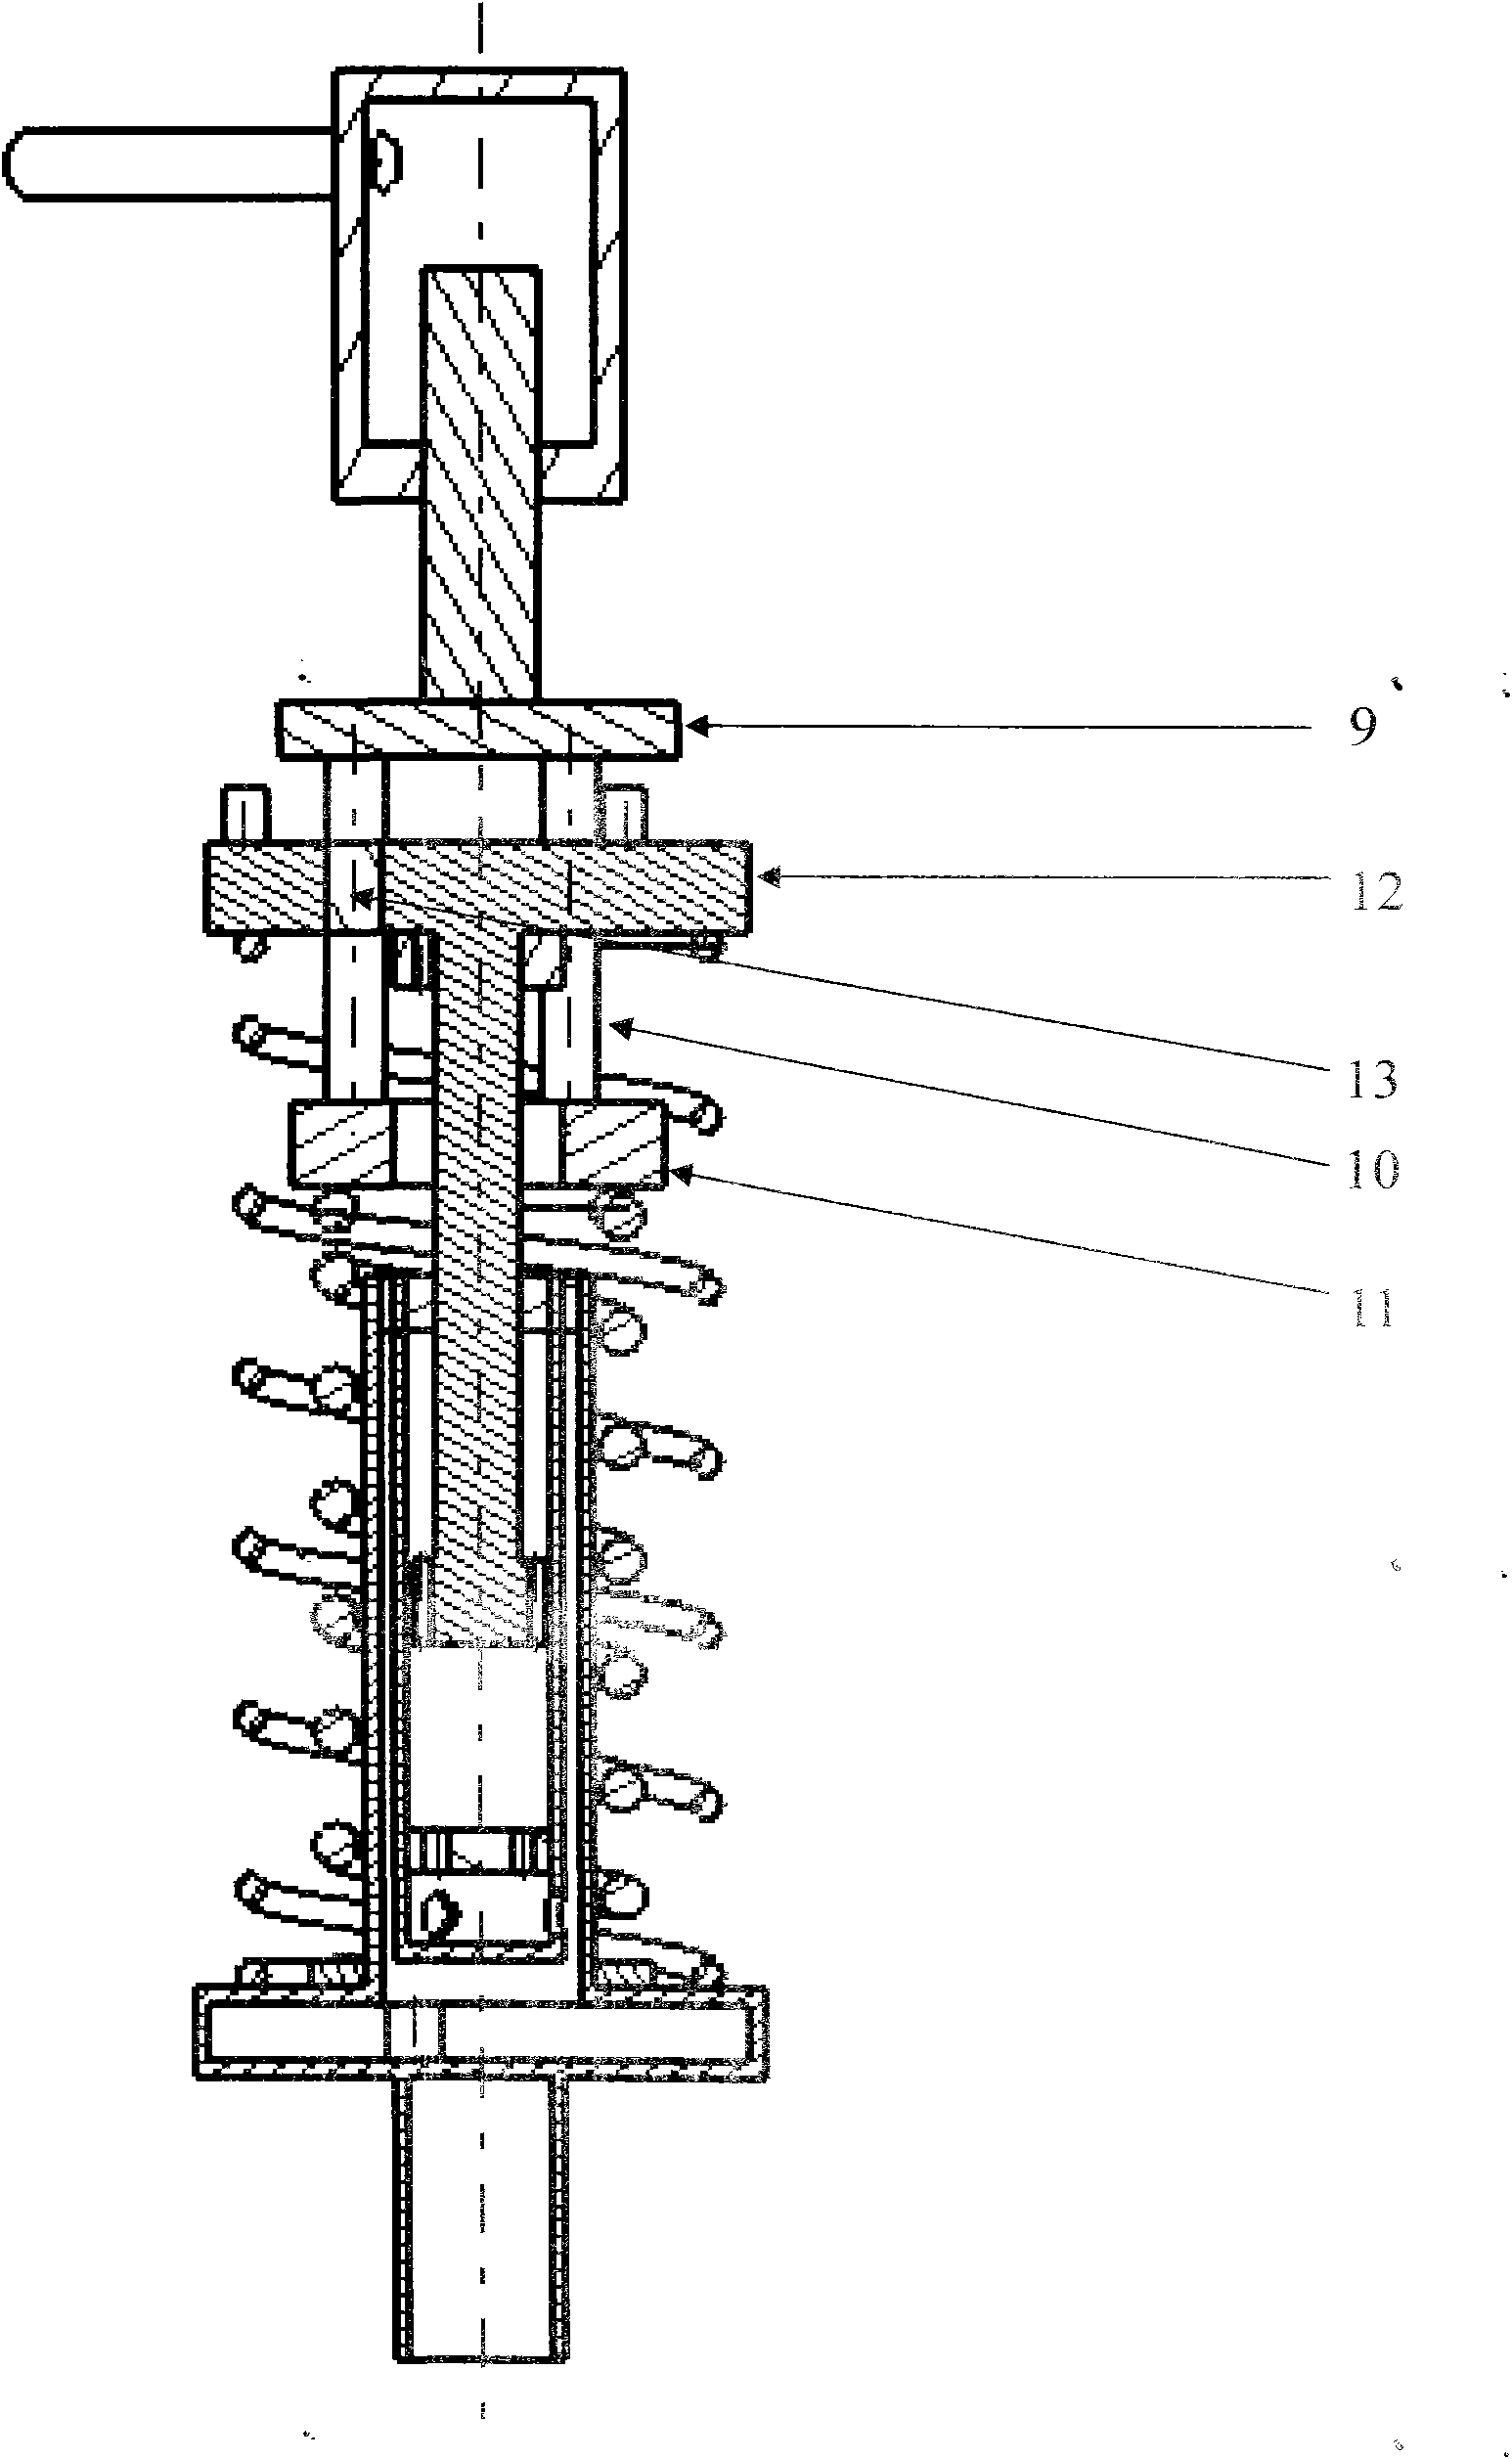 Shock absorption system for realizing vehicle suspension variation